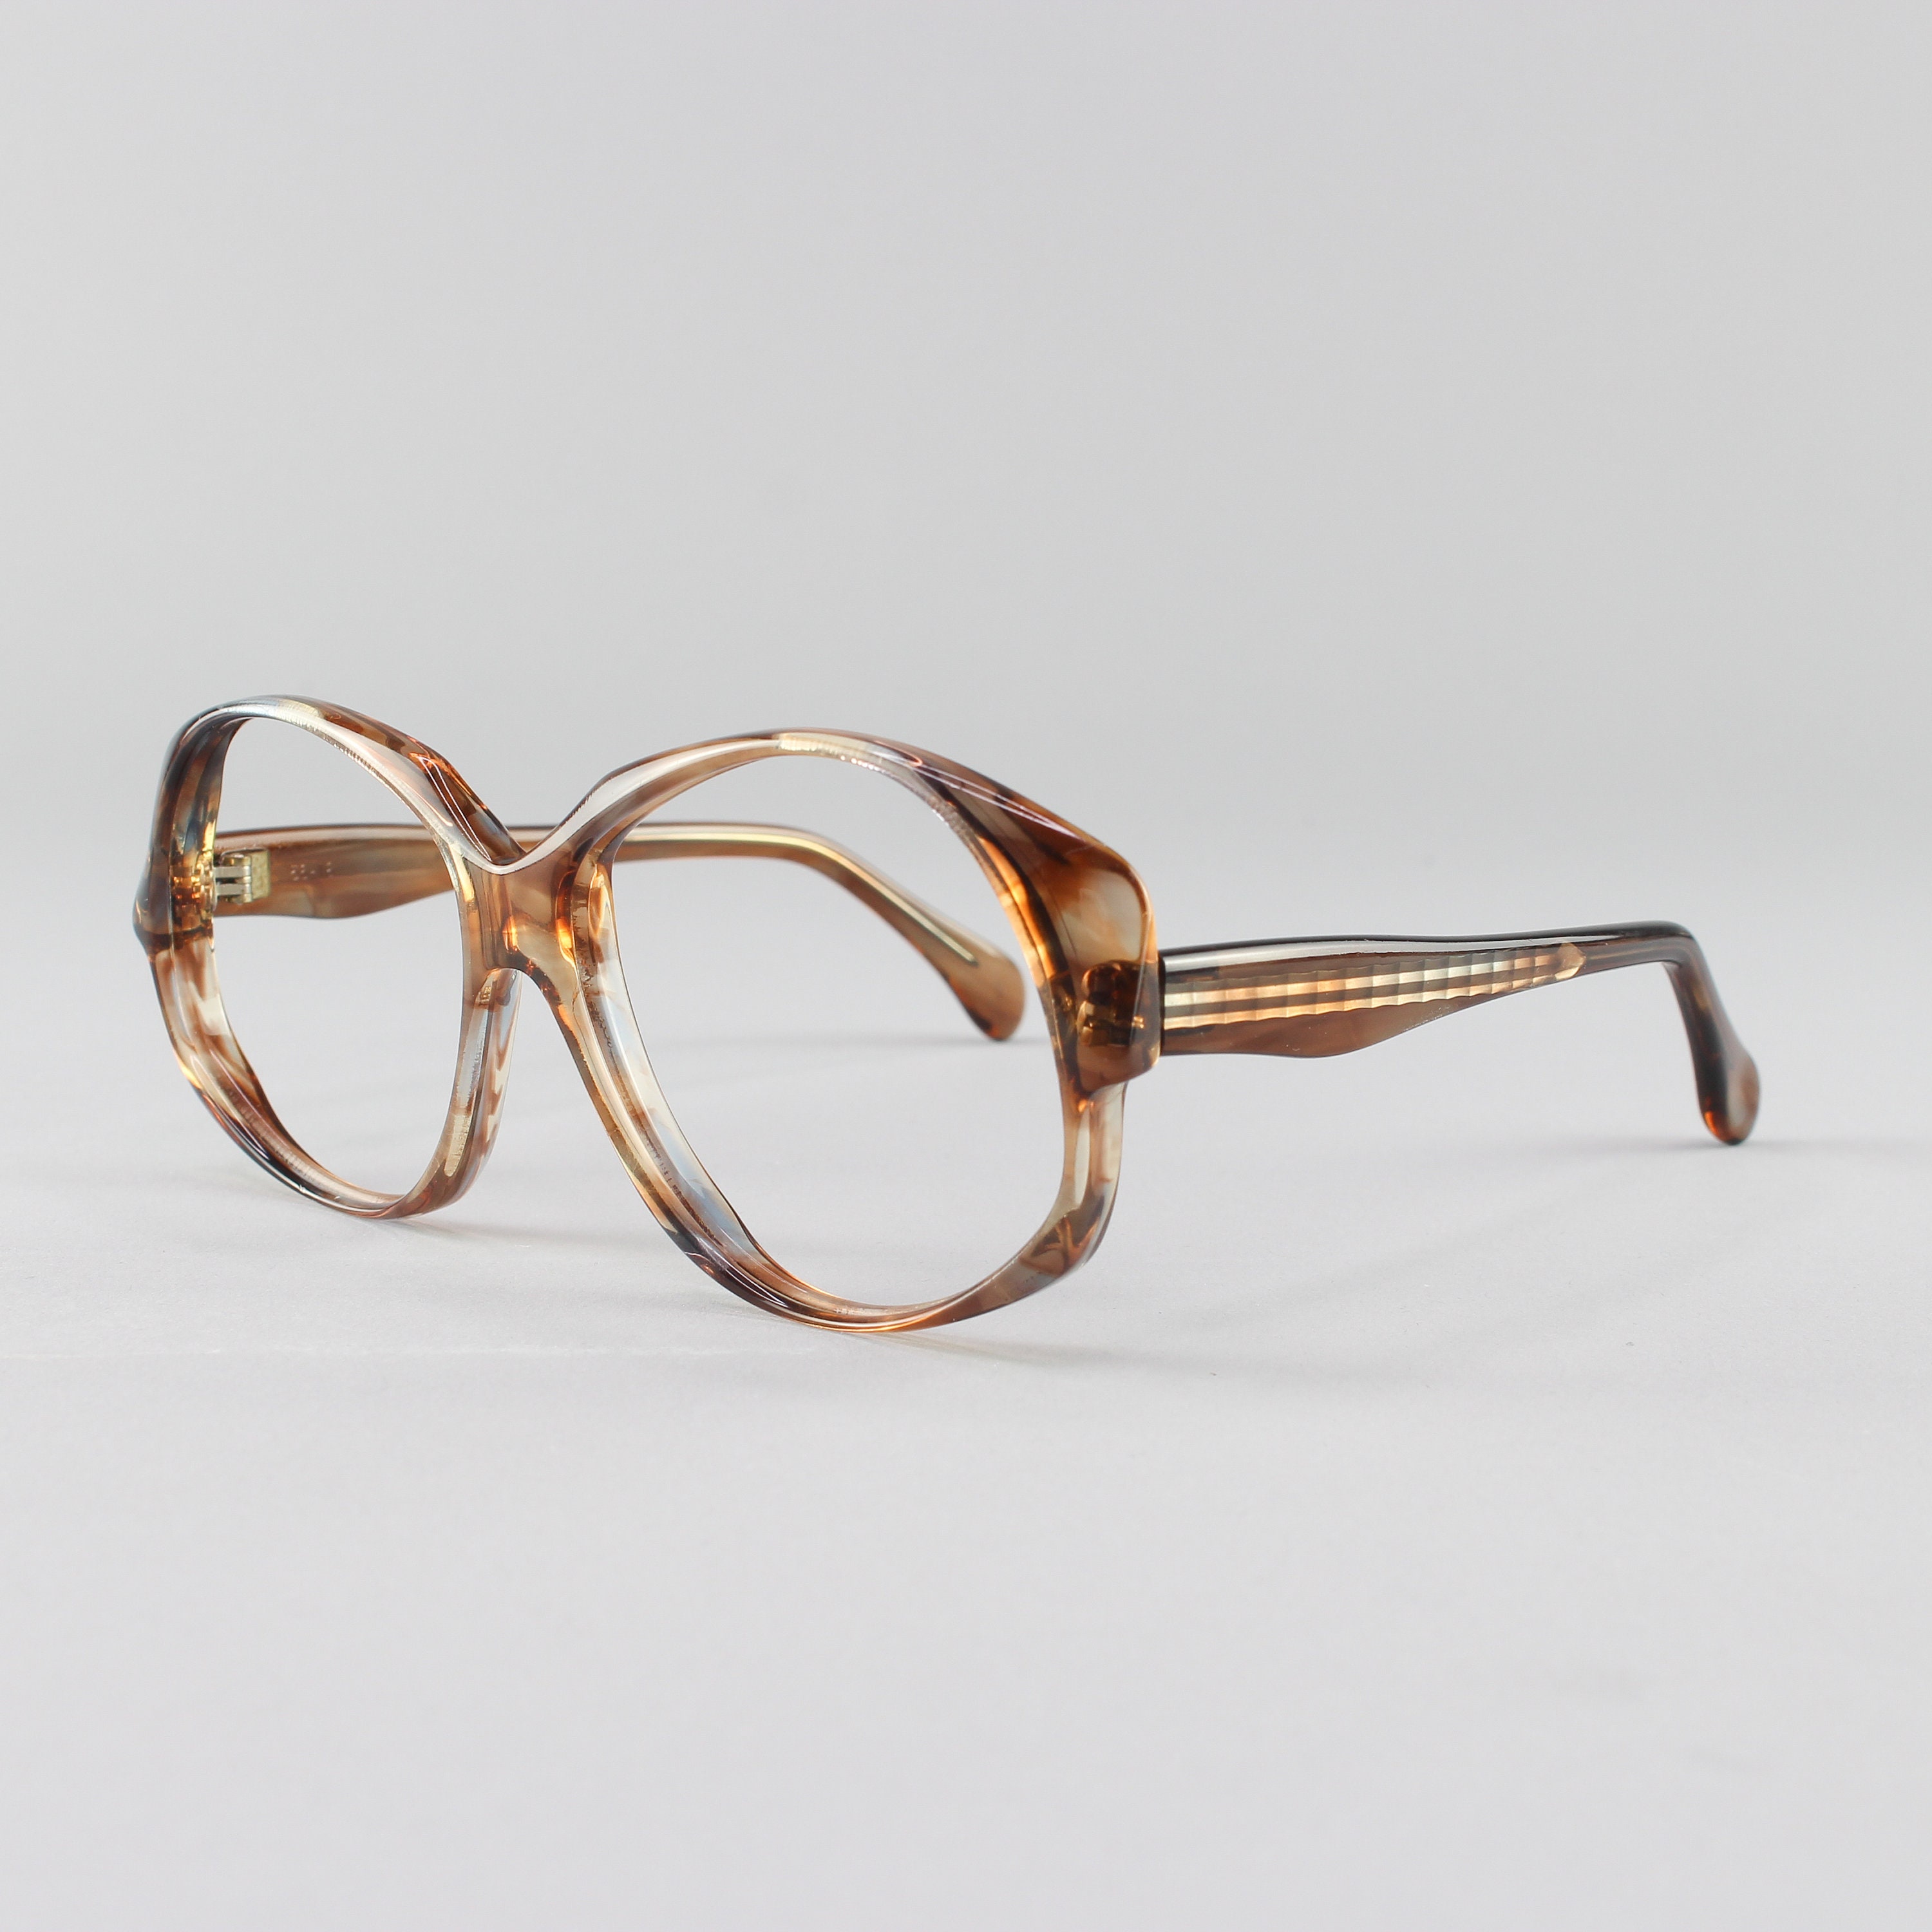 80s Vintage Eyeglasses Clear Brown Oversized Round Glasses 1980s